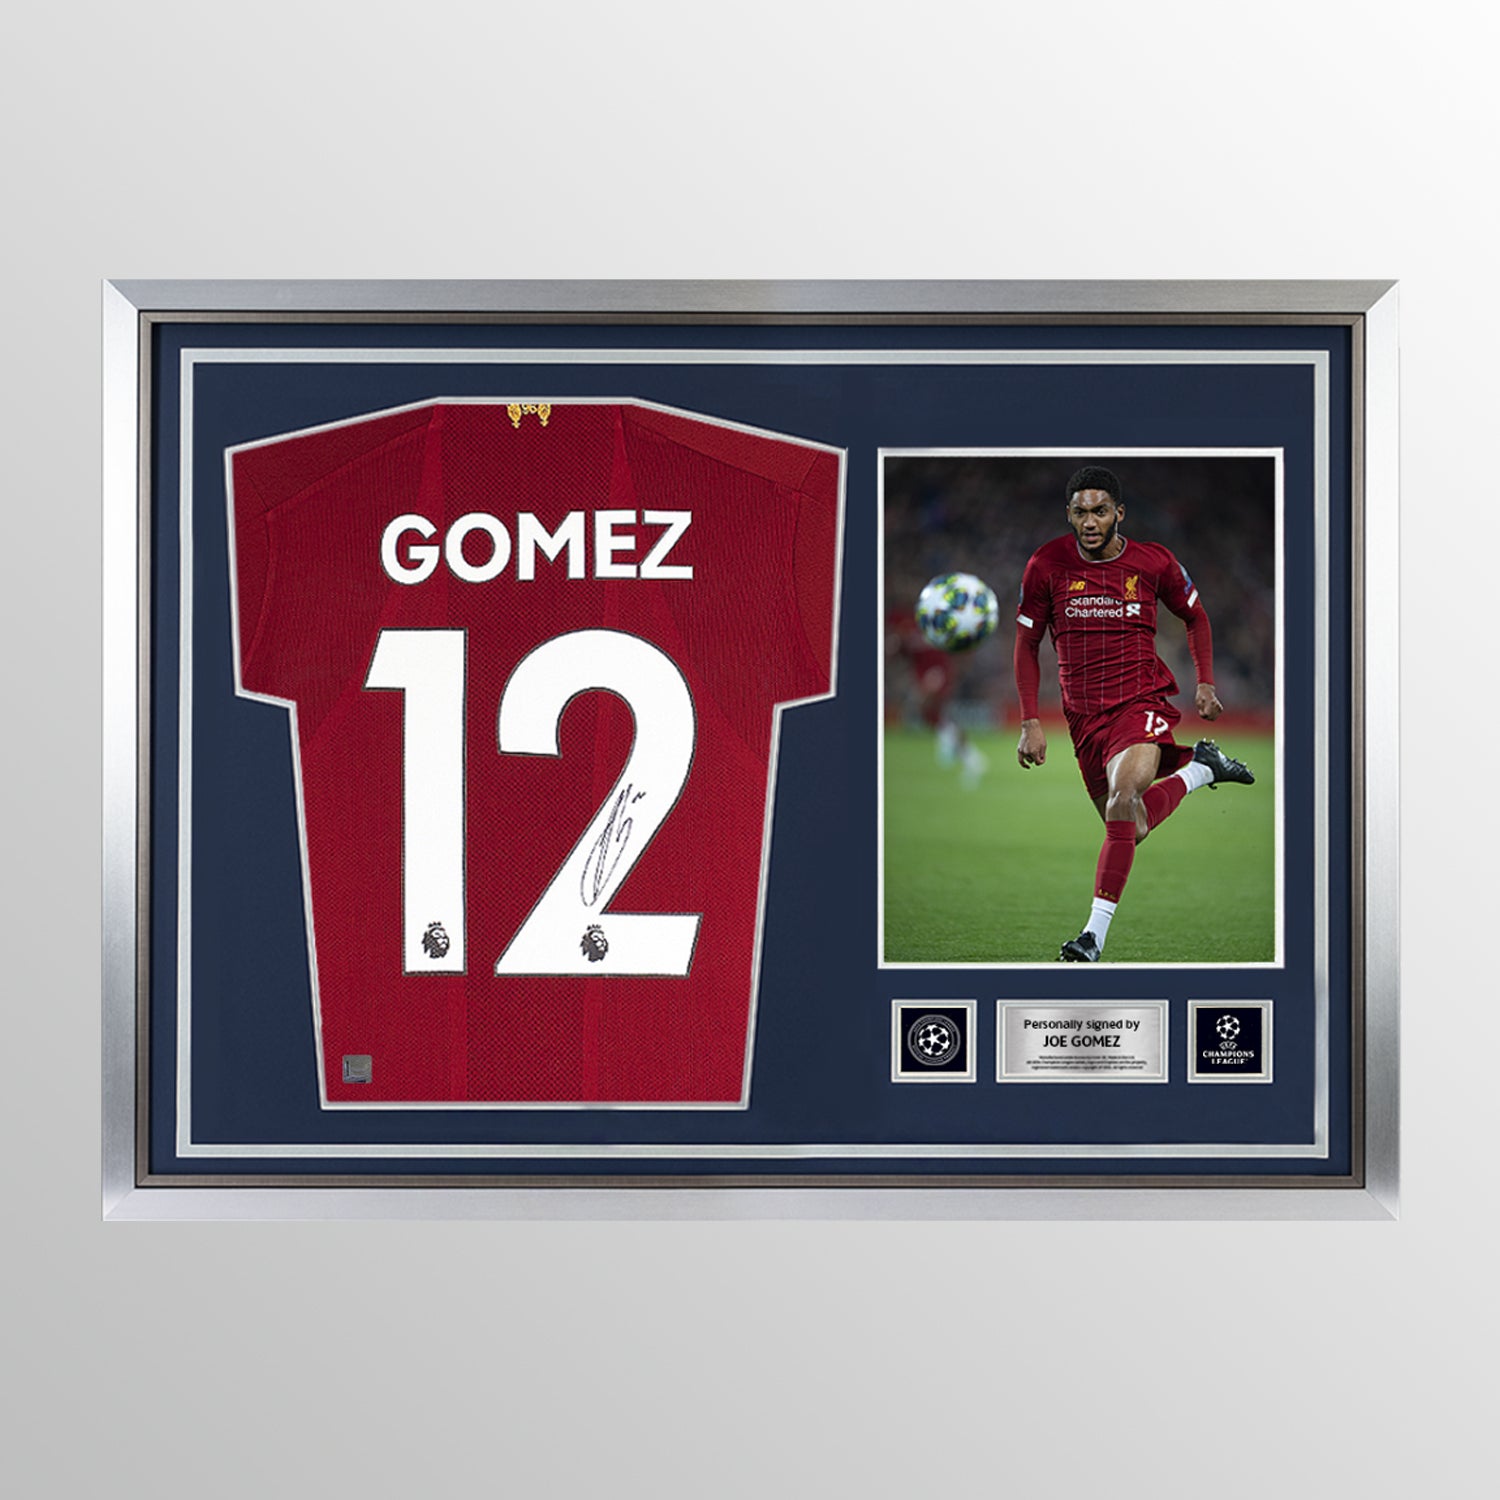 Joe Gomez Official UEFA Champions League Back Signed and Hero Framed Liverpool 2019-20 Home Shirt UEFA Club Competitions Online Store